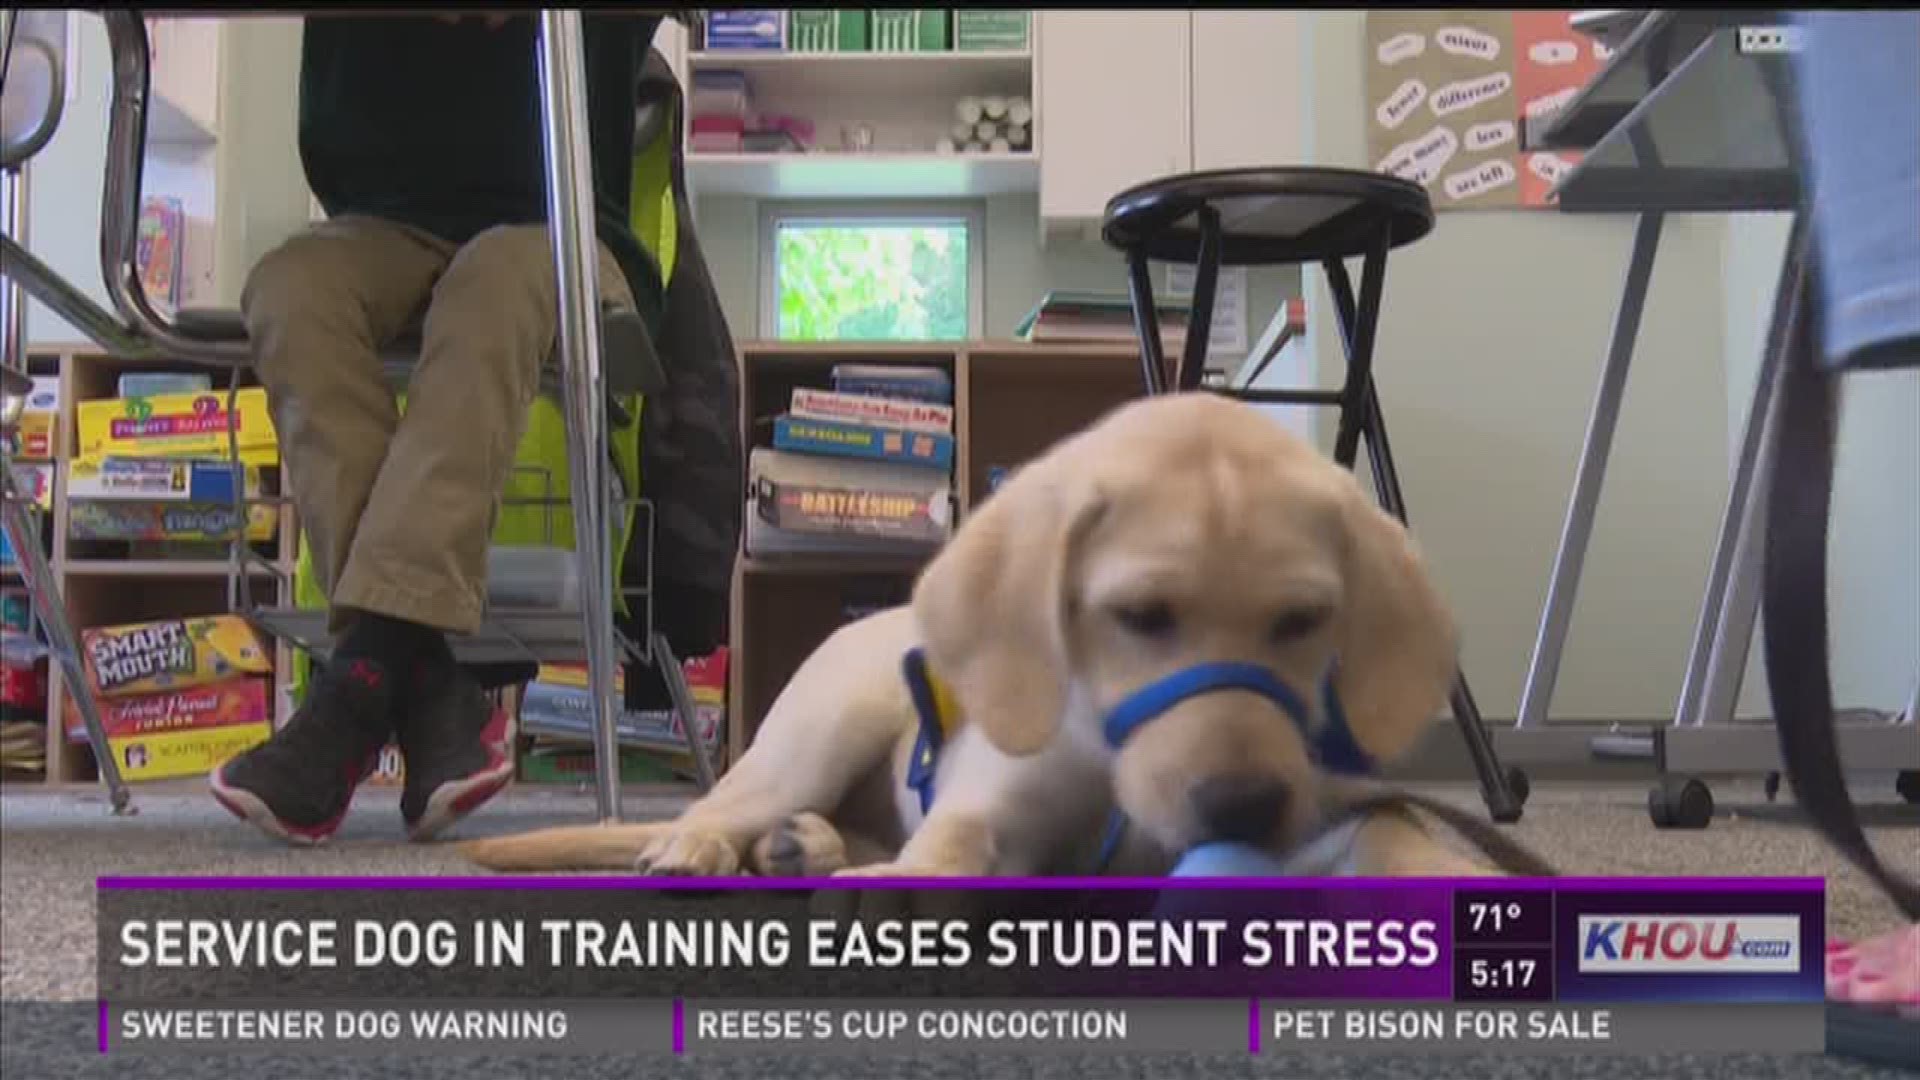 At the Parish School in west Houston has found a unique way to help ease students' stress: a service dog in training named Flight.